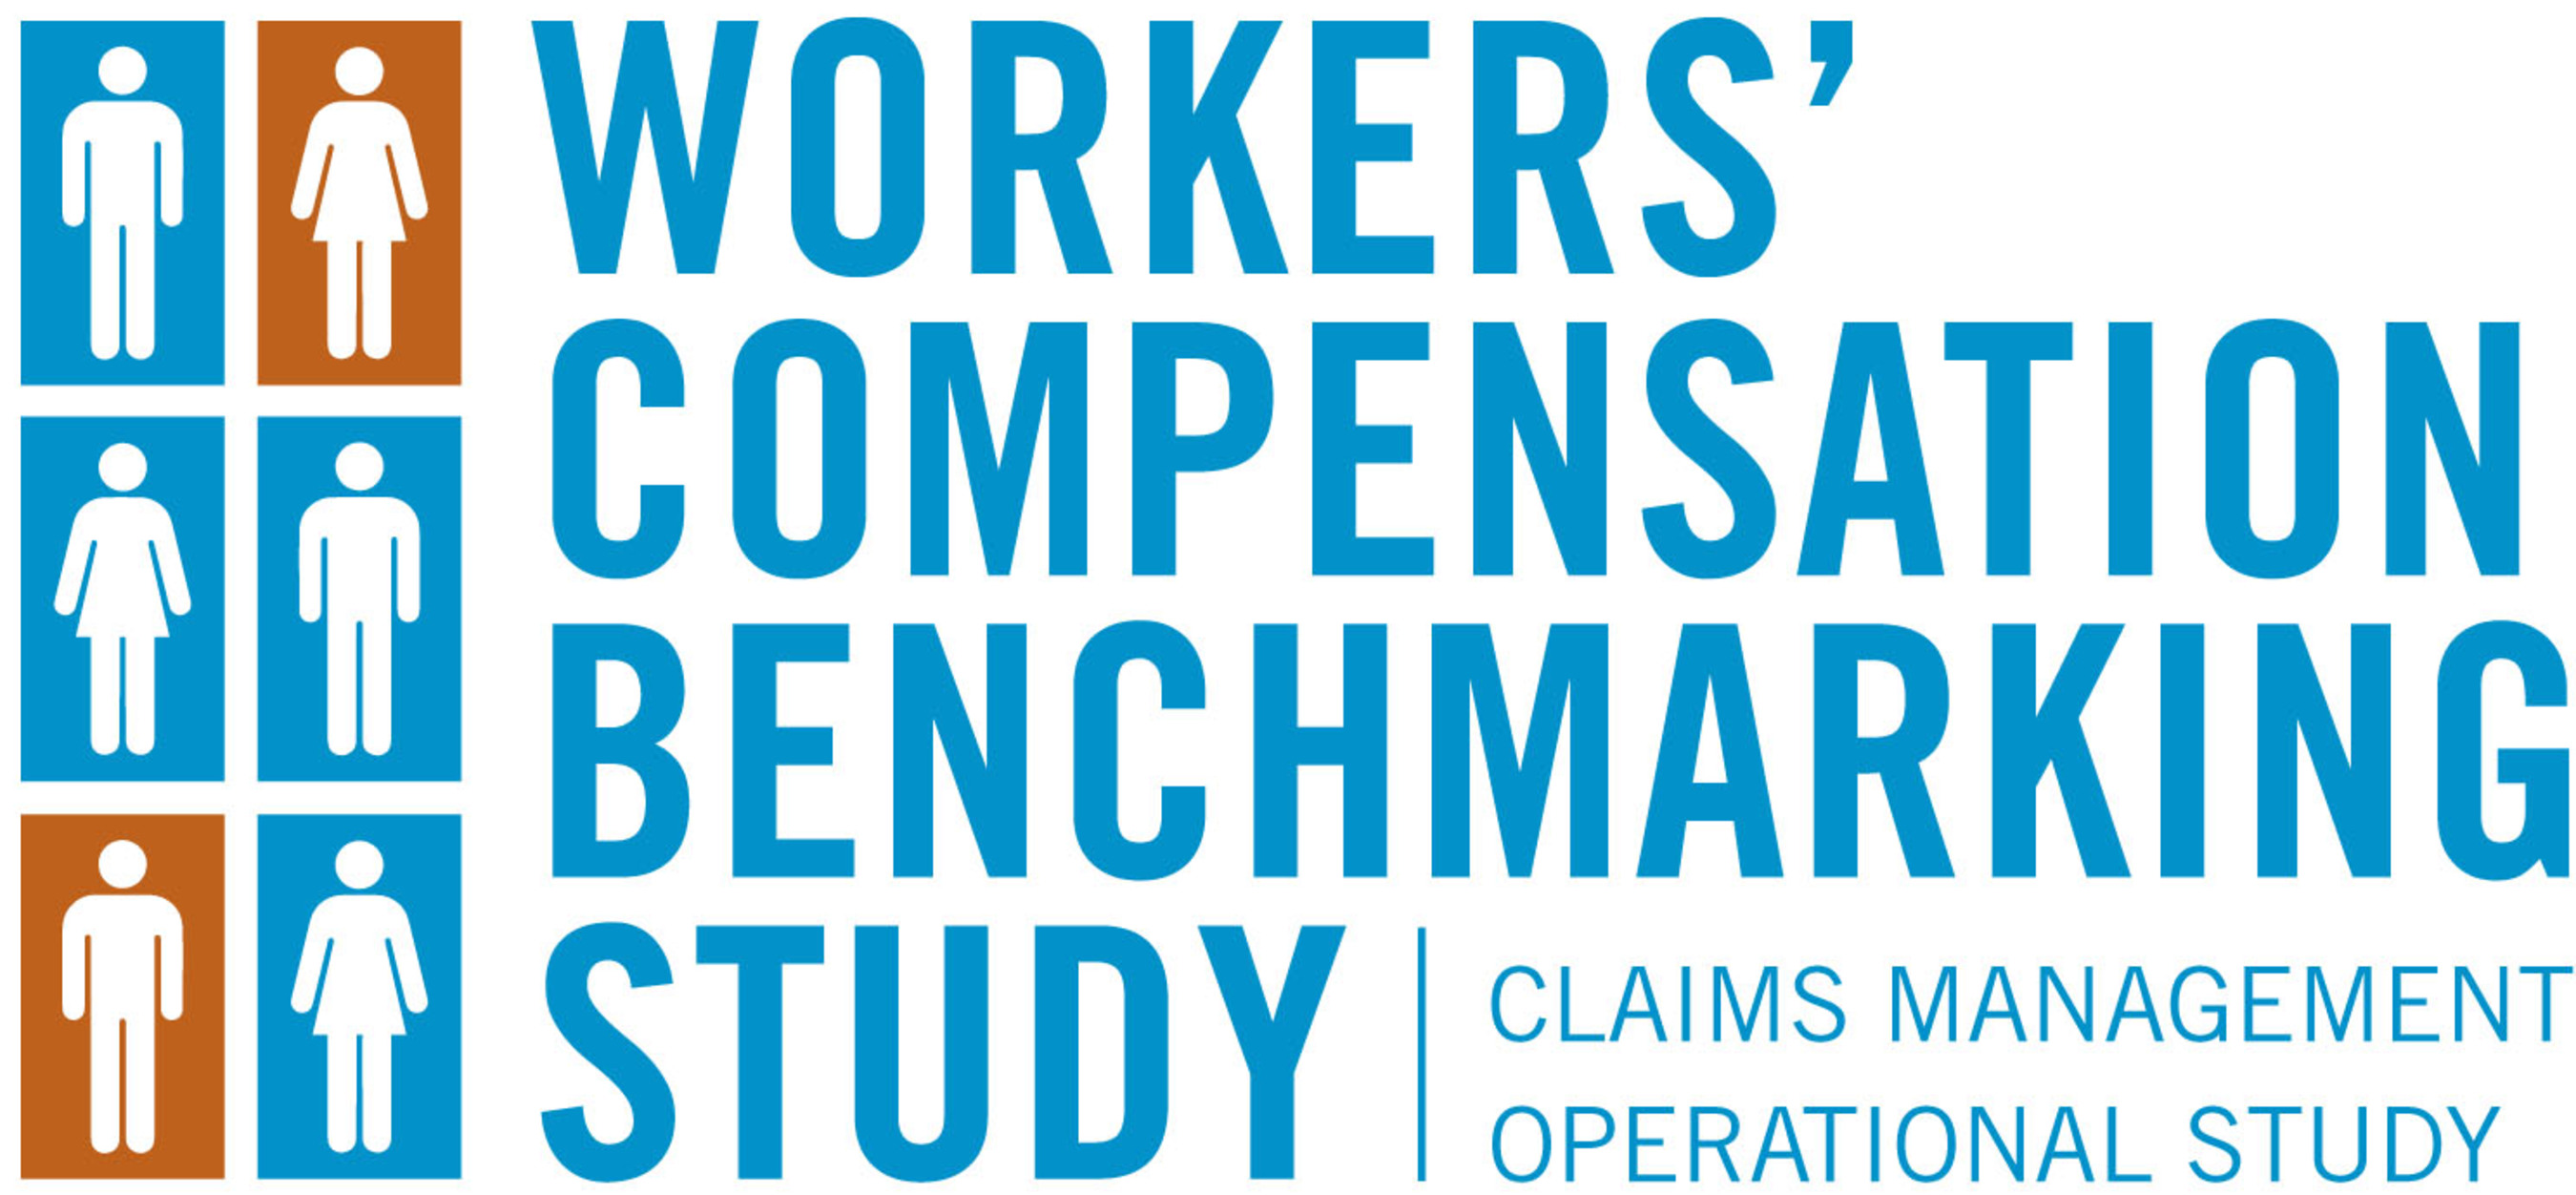 Workers' Compensation Benchmarking Study Logo